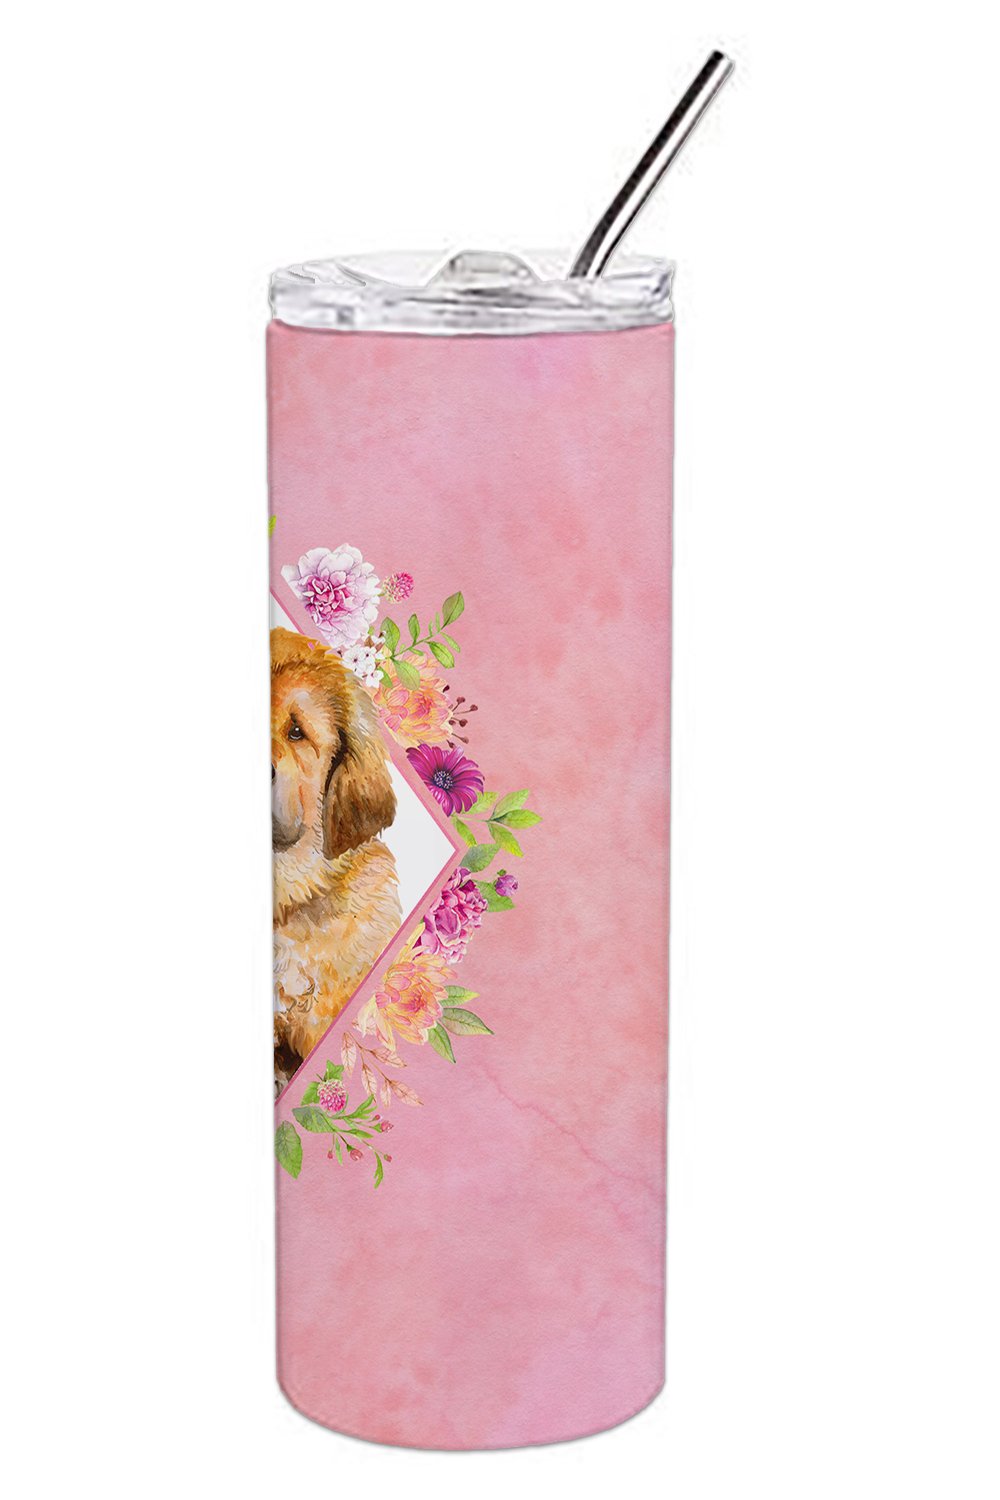 Tibetian Mastiff Puppy Pink Flowers Double Walled Stainless Steel 20 oz Skinny Tumbler CK4189TBL20 by Caroline's Treasures